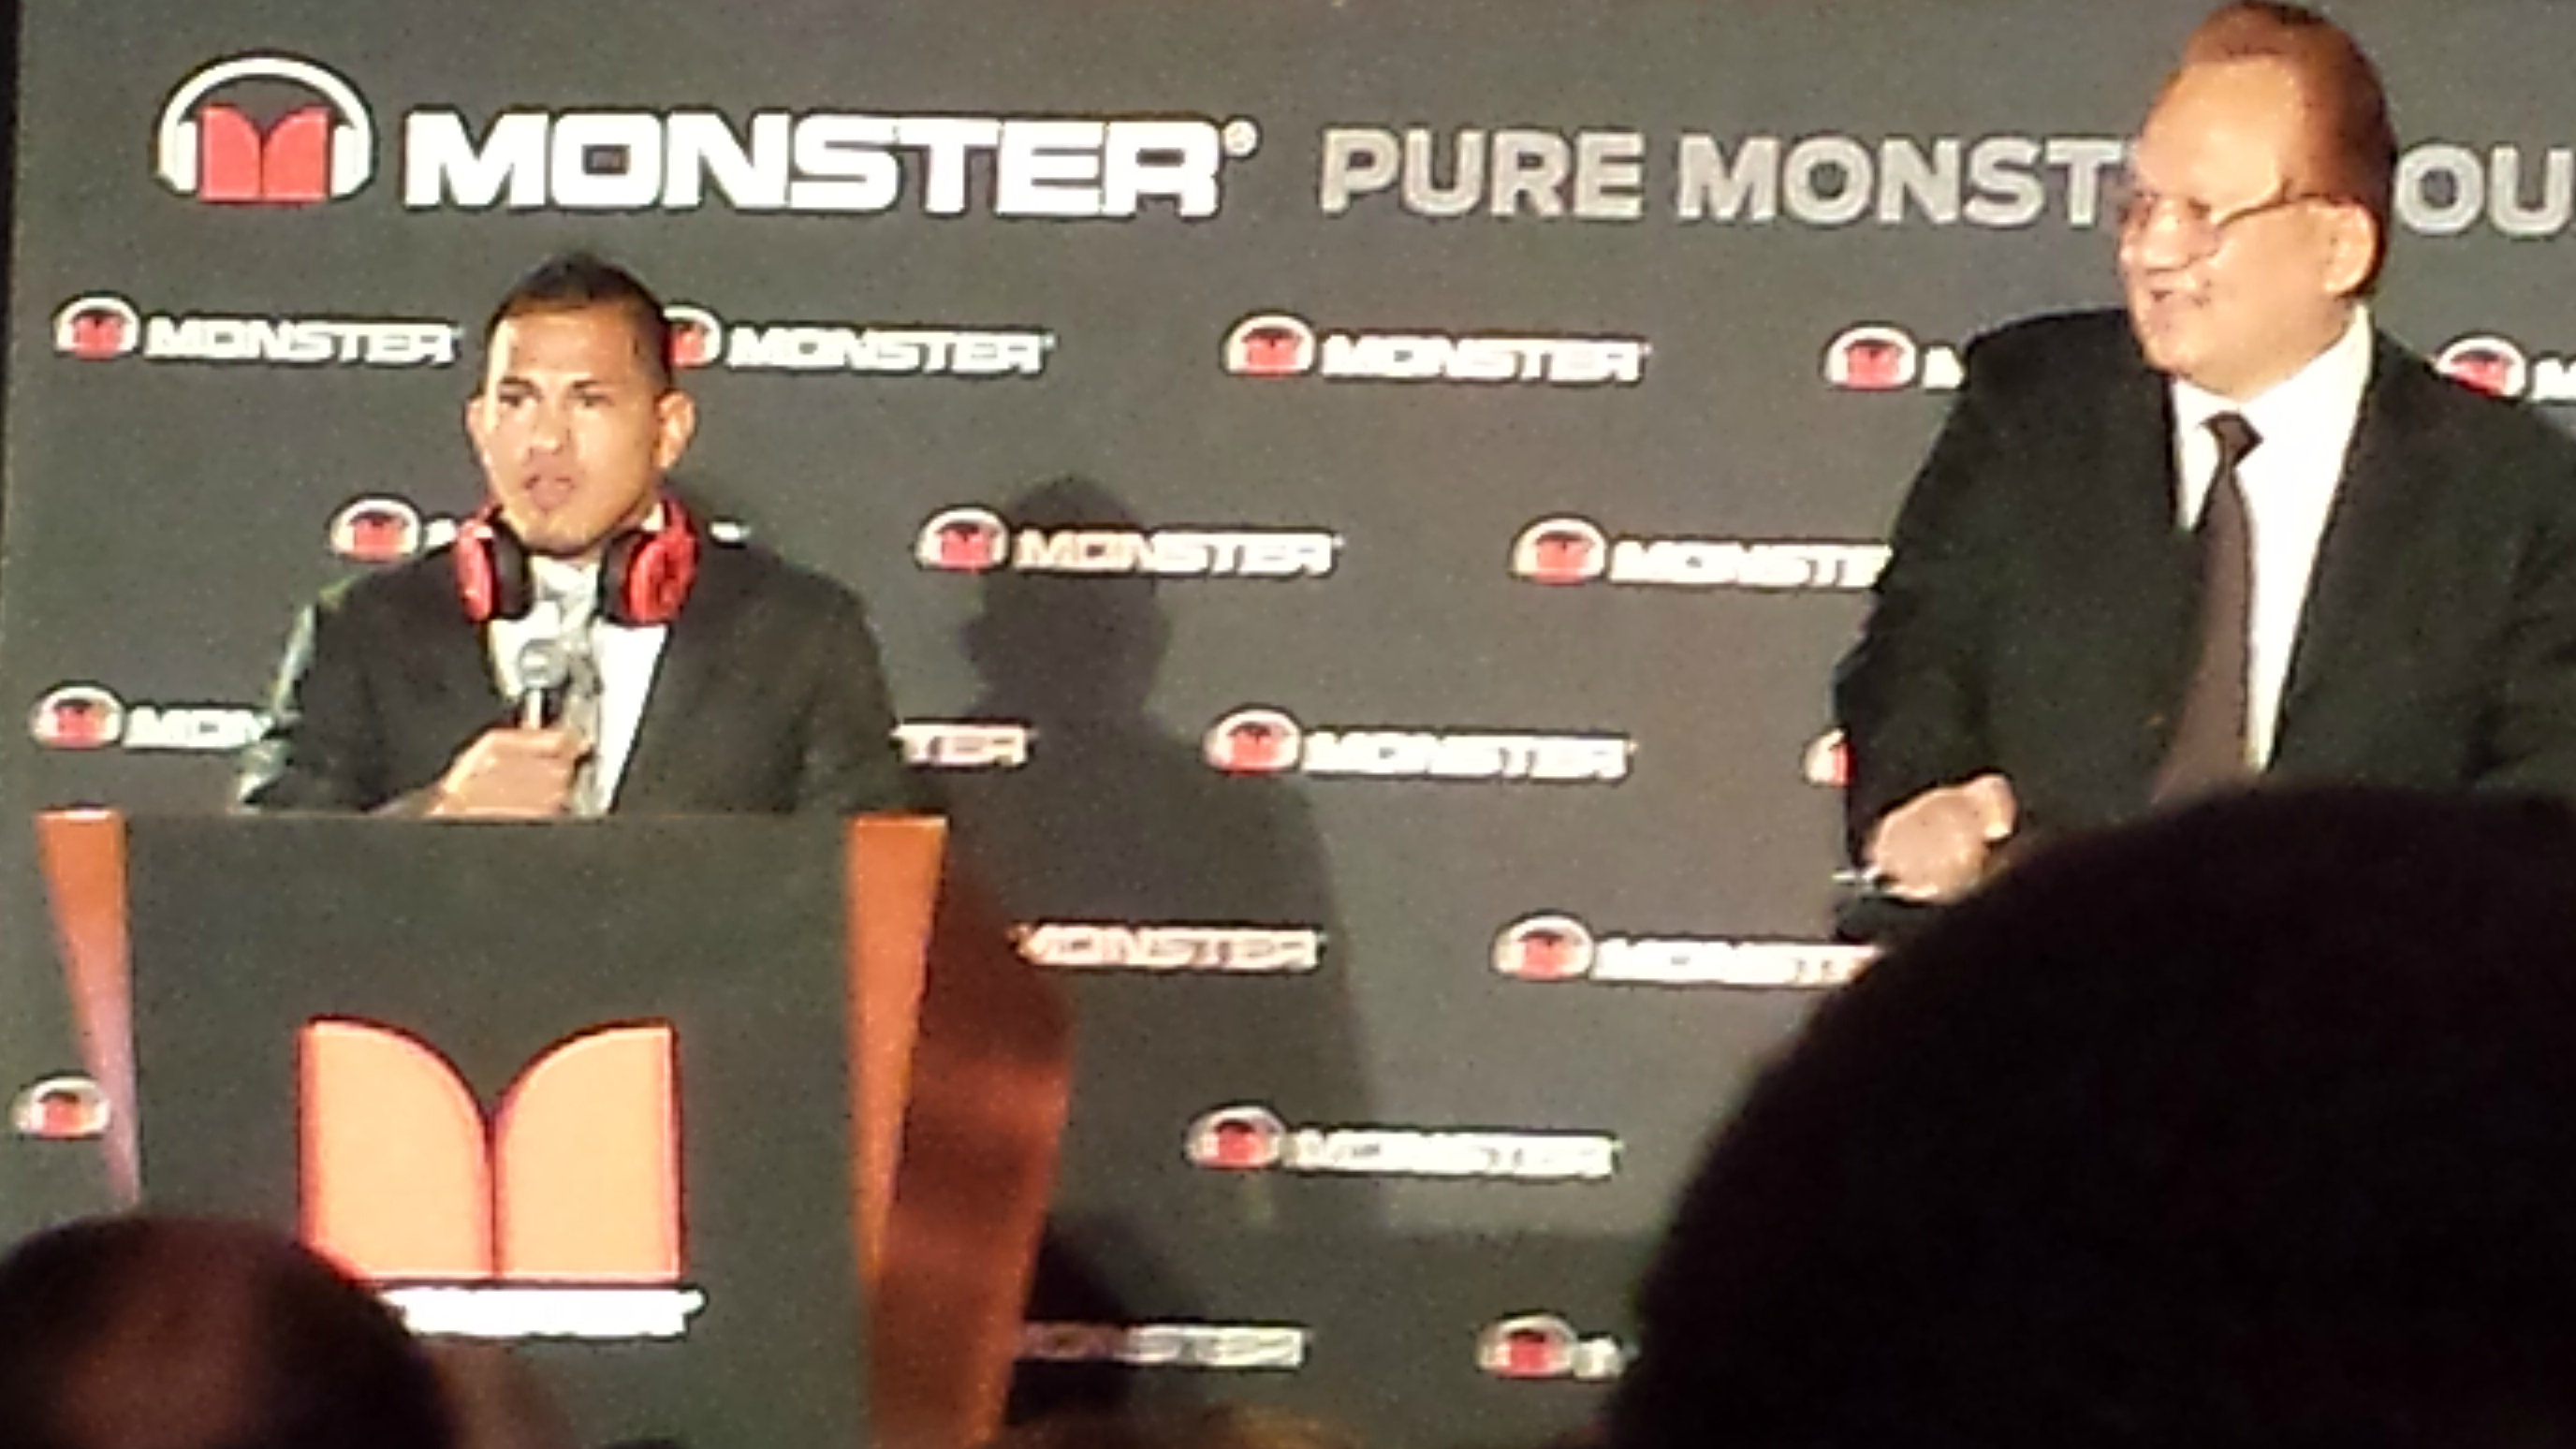 UFC champ Anthony Pettis announcing the Octagon headphones with Monster CEO Noel Lee.